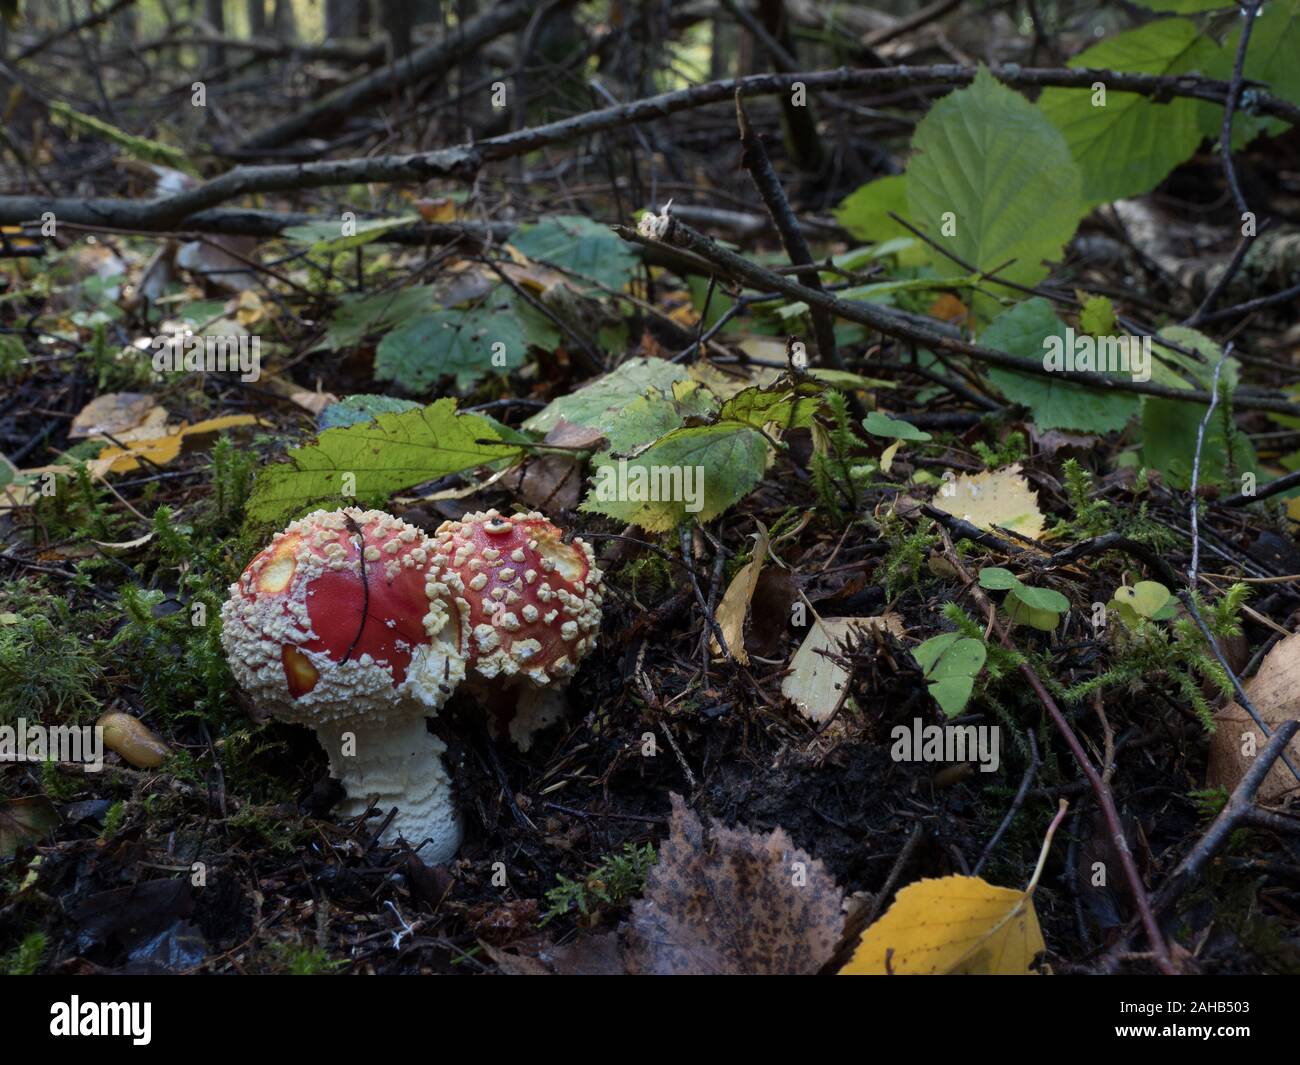 Amanita muscaria, commonly known as the fly agaric or fly amanita growing in Görvälns naturreservat in Järfälla, Sweden Stock Photo